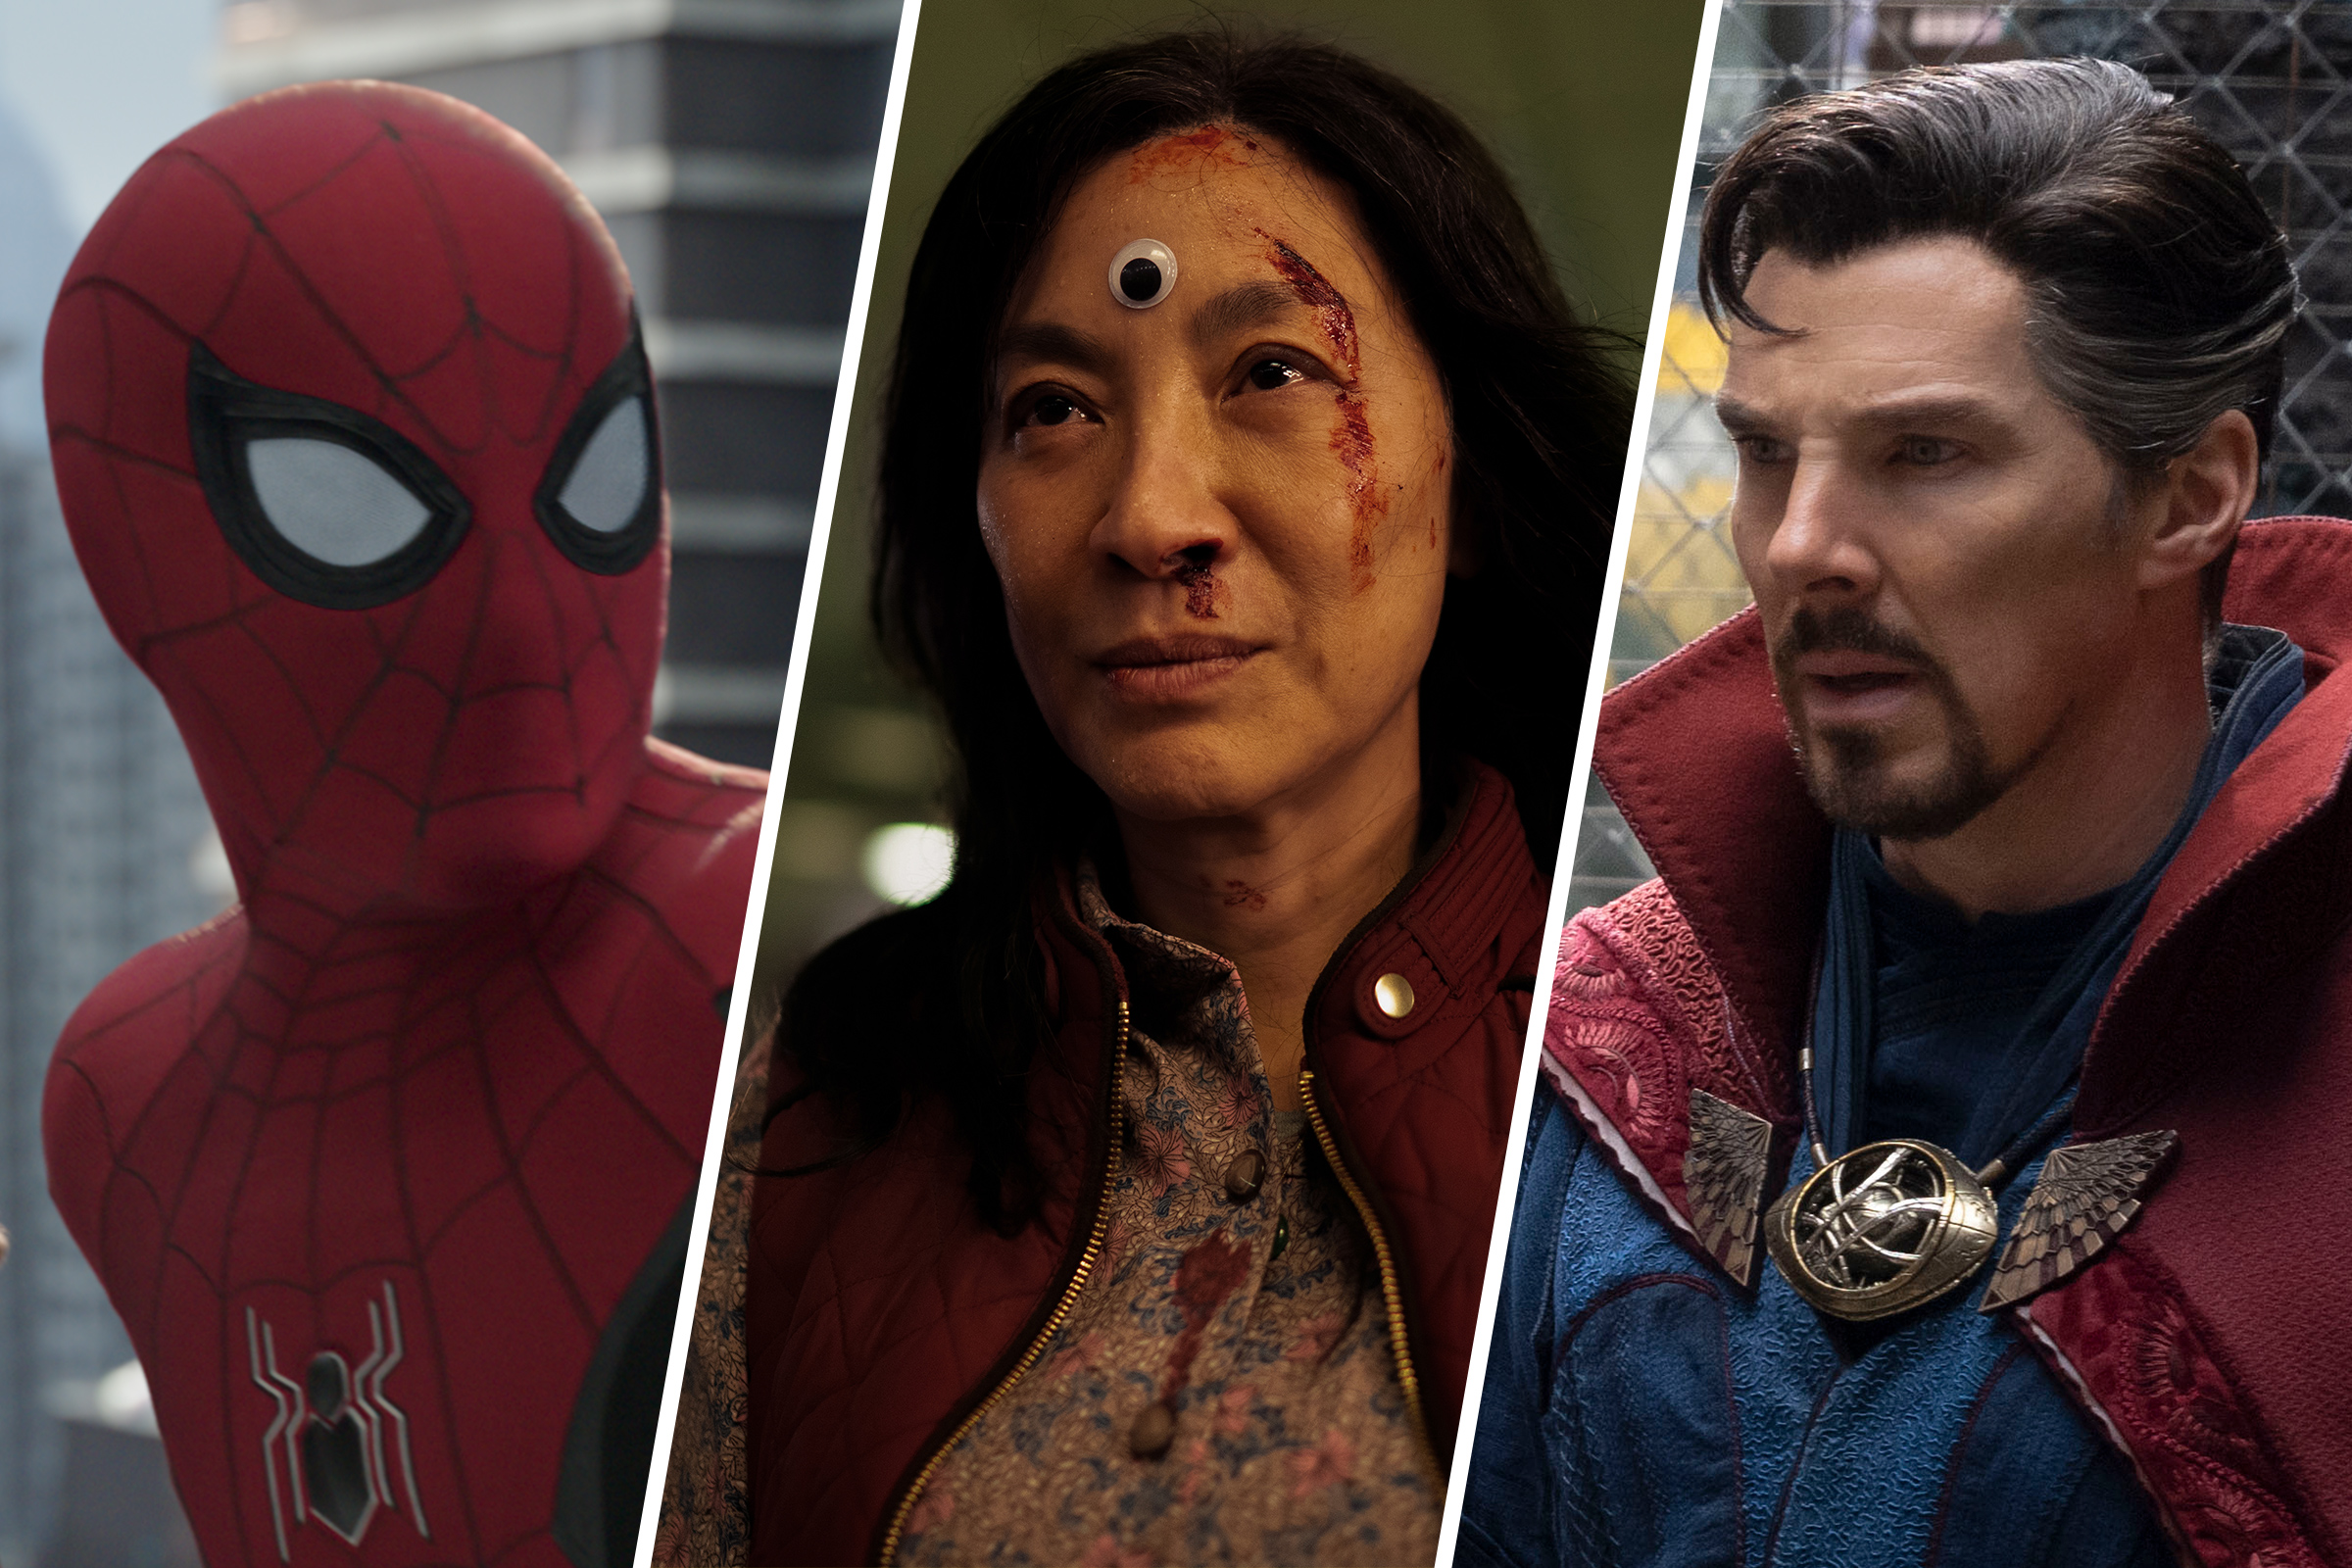 Tom Holland as Spider-Man, Michelle Yeoh as Evelyn Quan Wang, and Benedict Cumberbatch as Doctor Strange. (Spider Man: Sony Pictures; Everything Everywhere All at Once: A24; Doctor Strange: Marvel Studios)